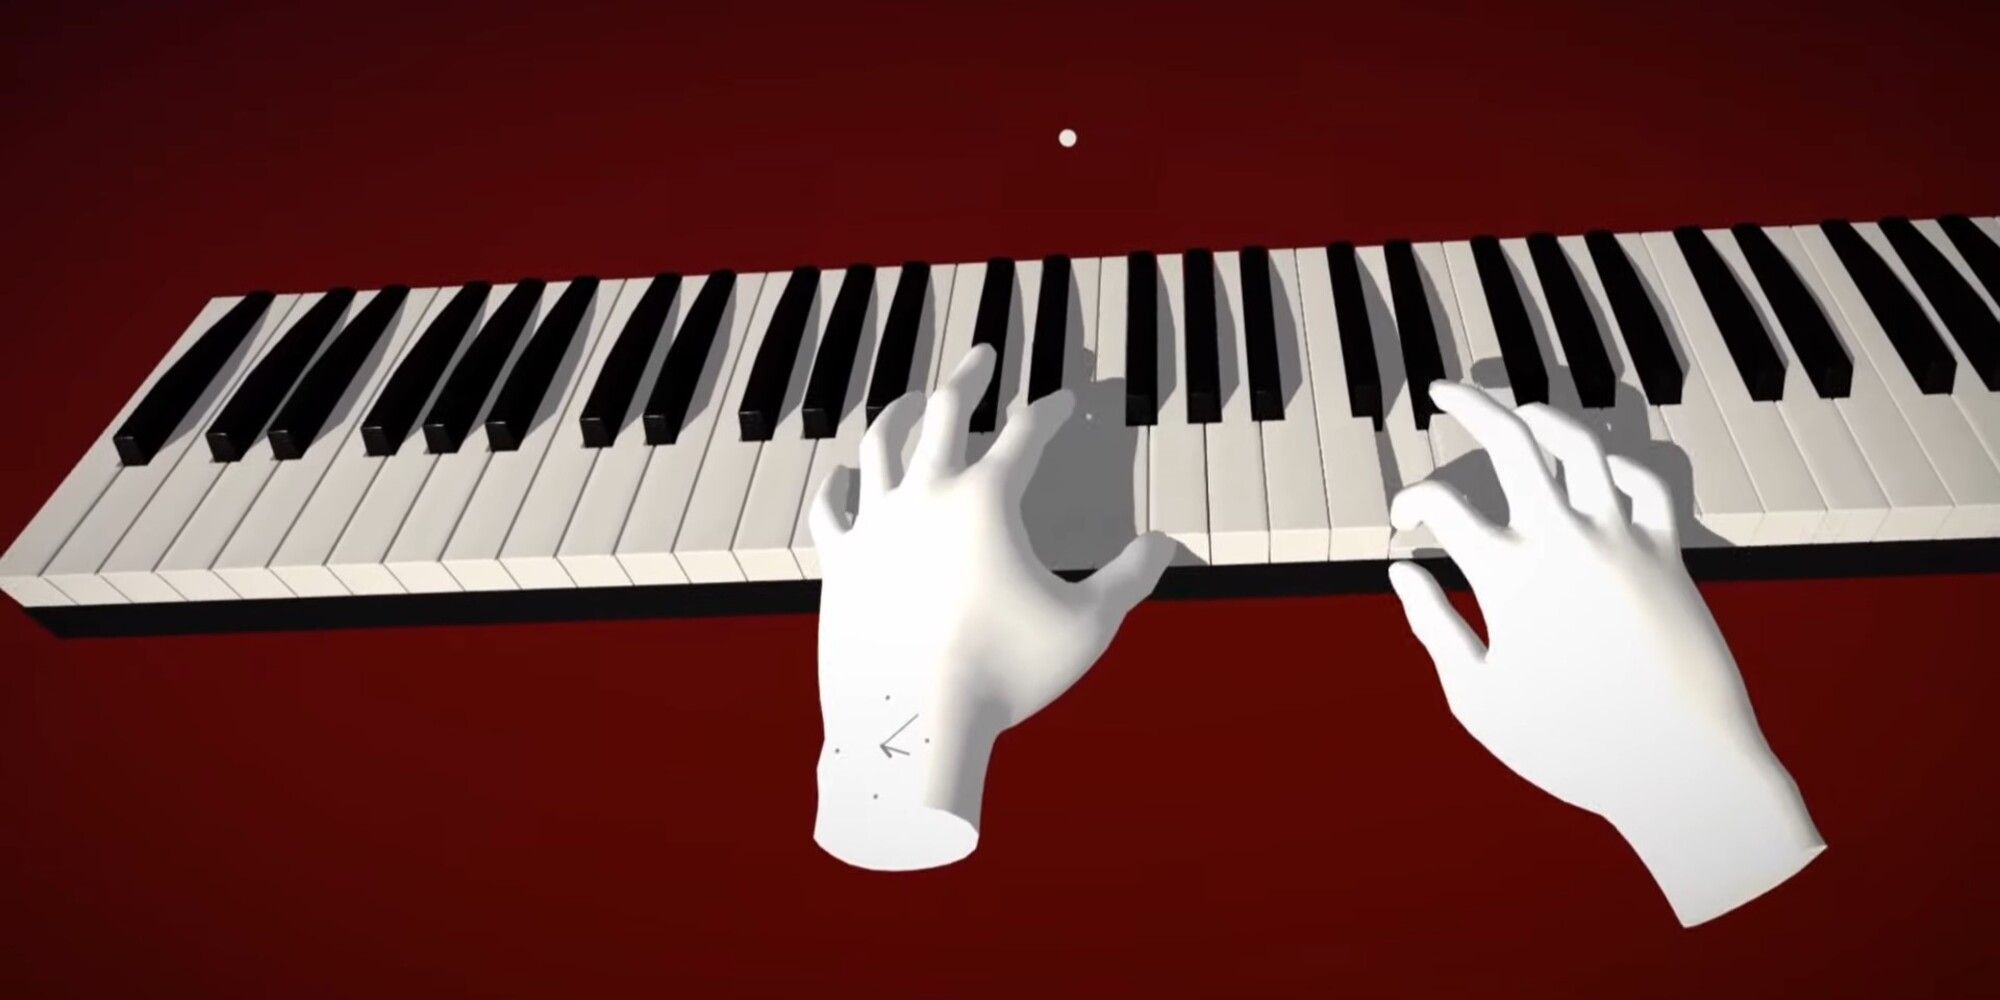 Two virtual hands playing a song on VRtuos Pro